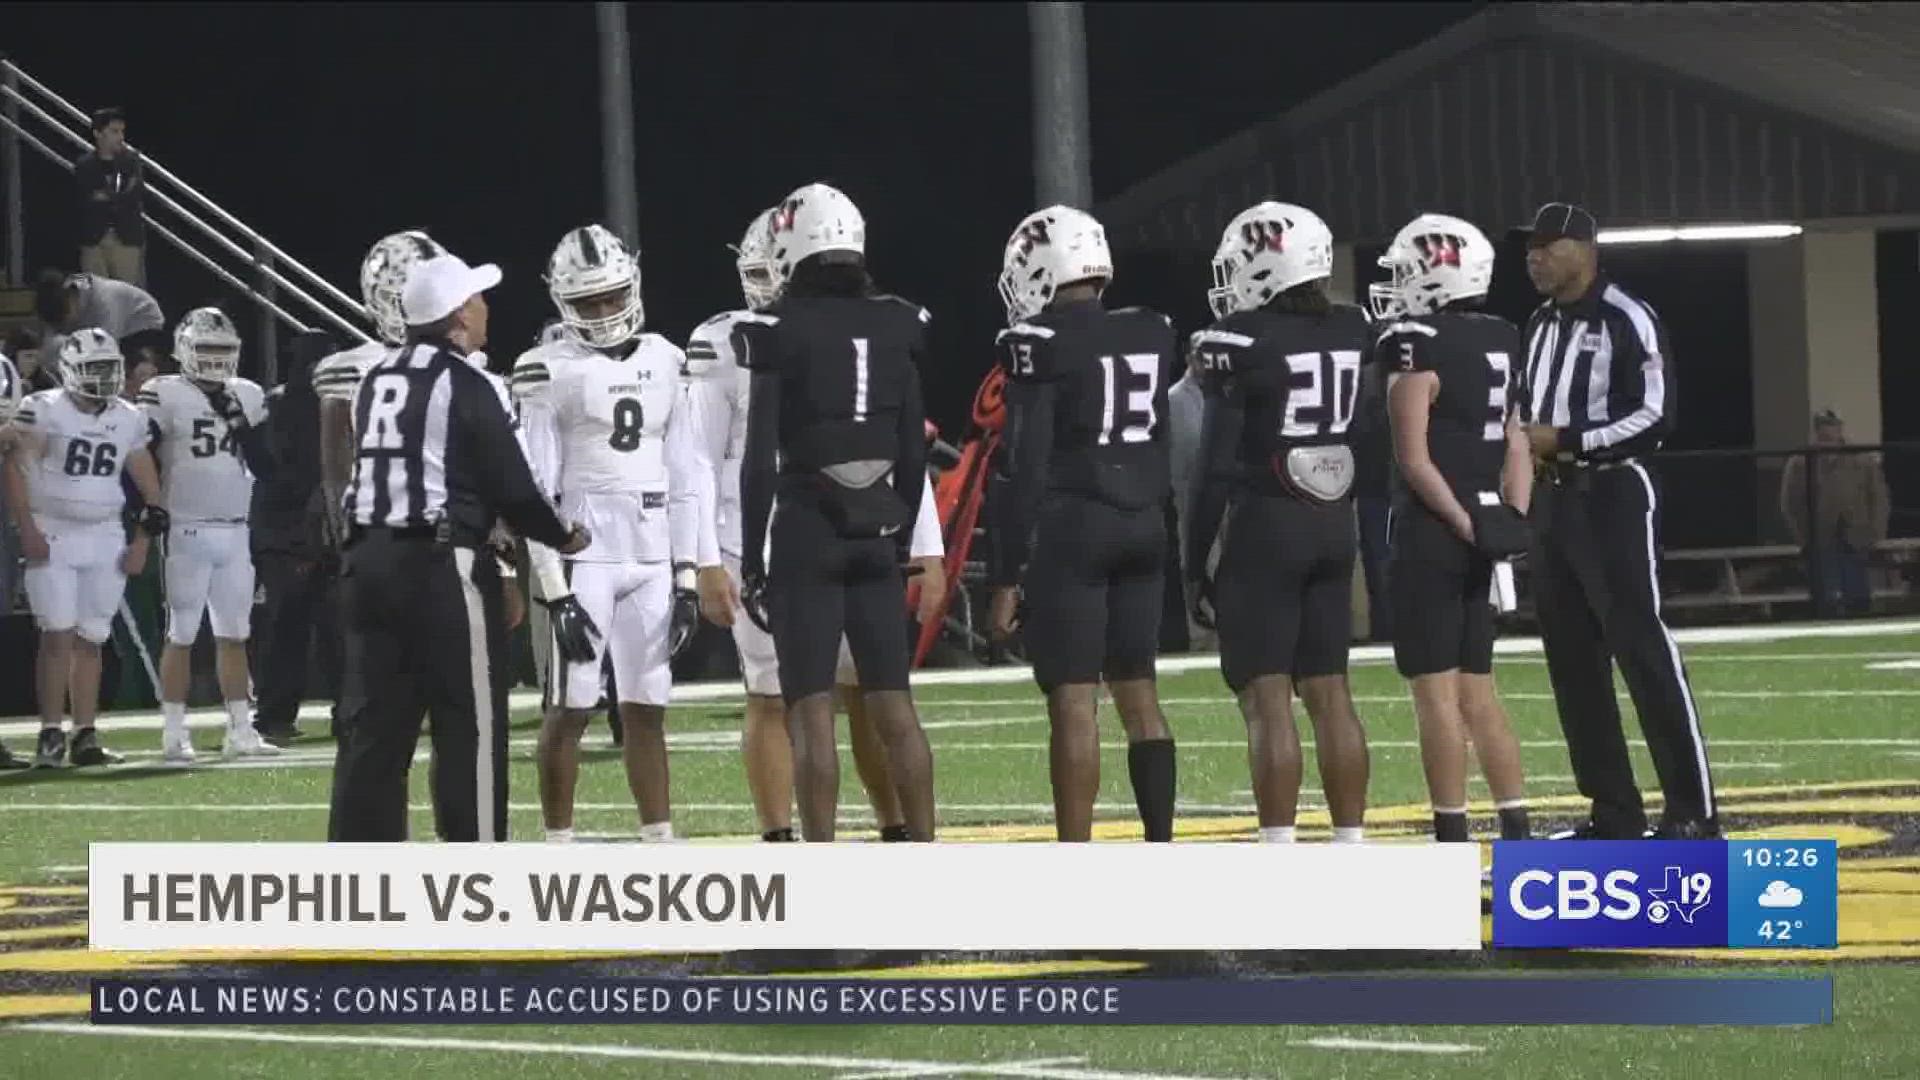 Highlights and analysis from first-round playoff games across East Texas.